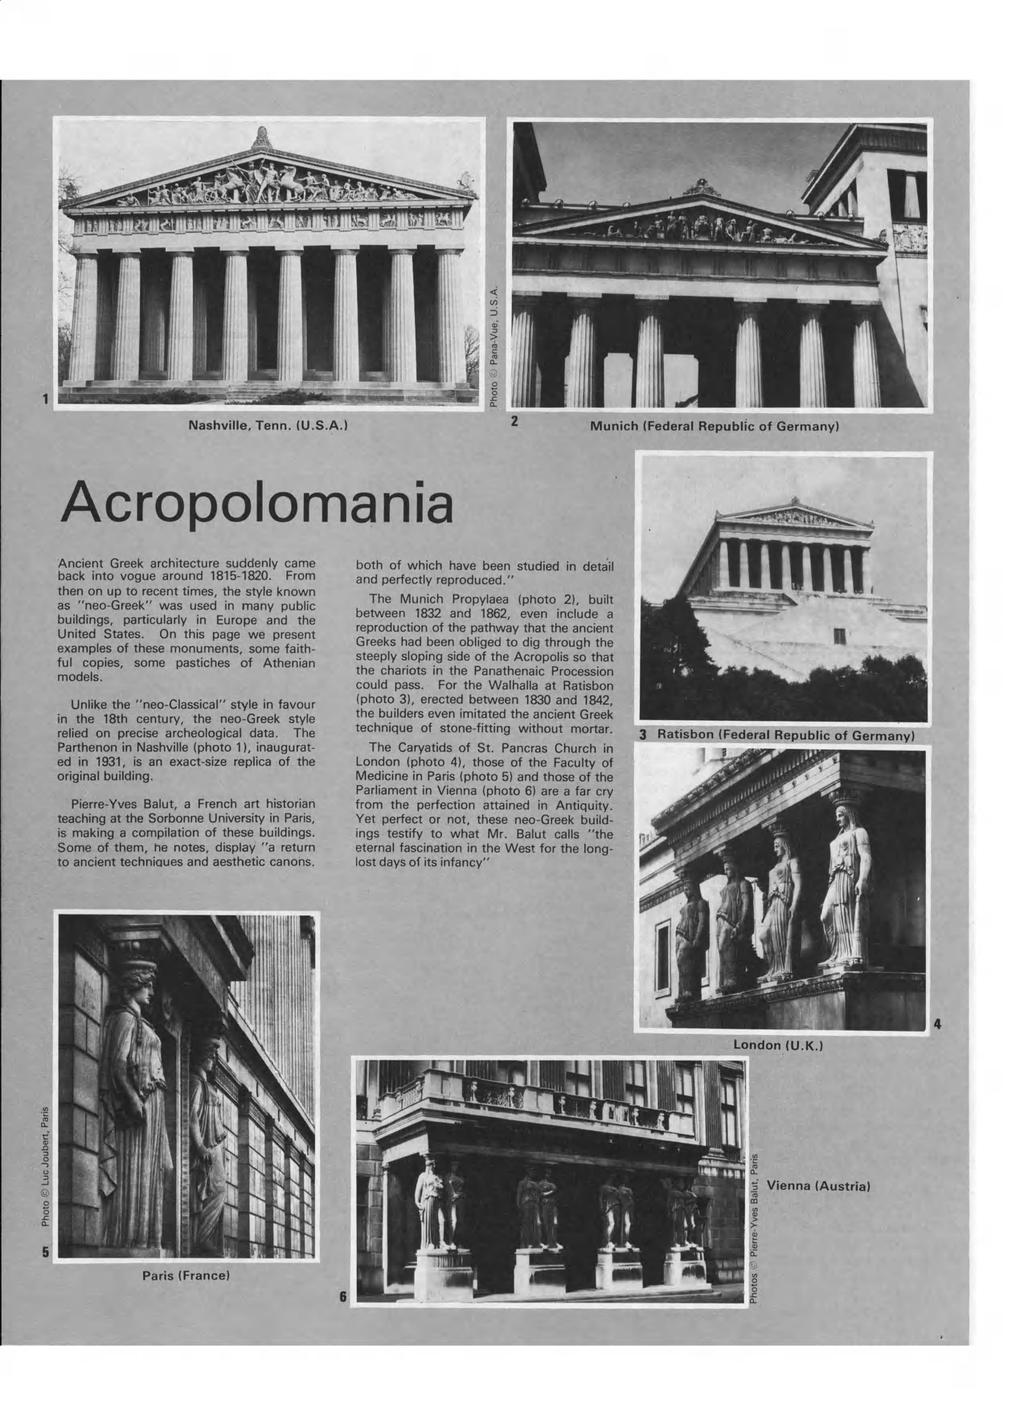 Nashville, Tenn. (U.S.A.) Munich (Federal Republic of Germany) Acropolomania Ancient Greek architecture suddenly came back into vogue around 1815-1820.